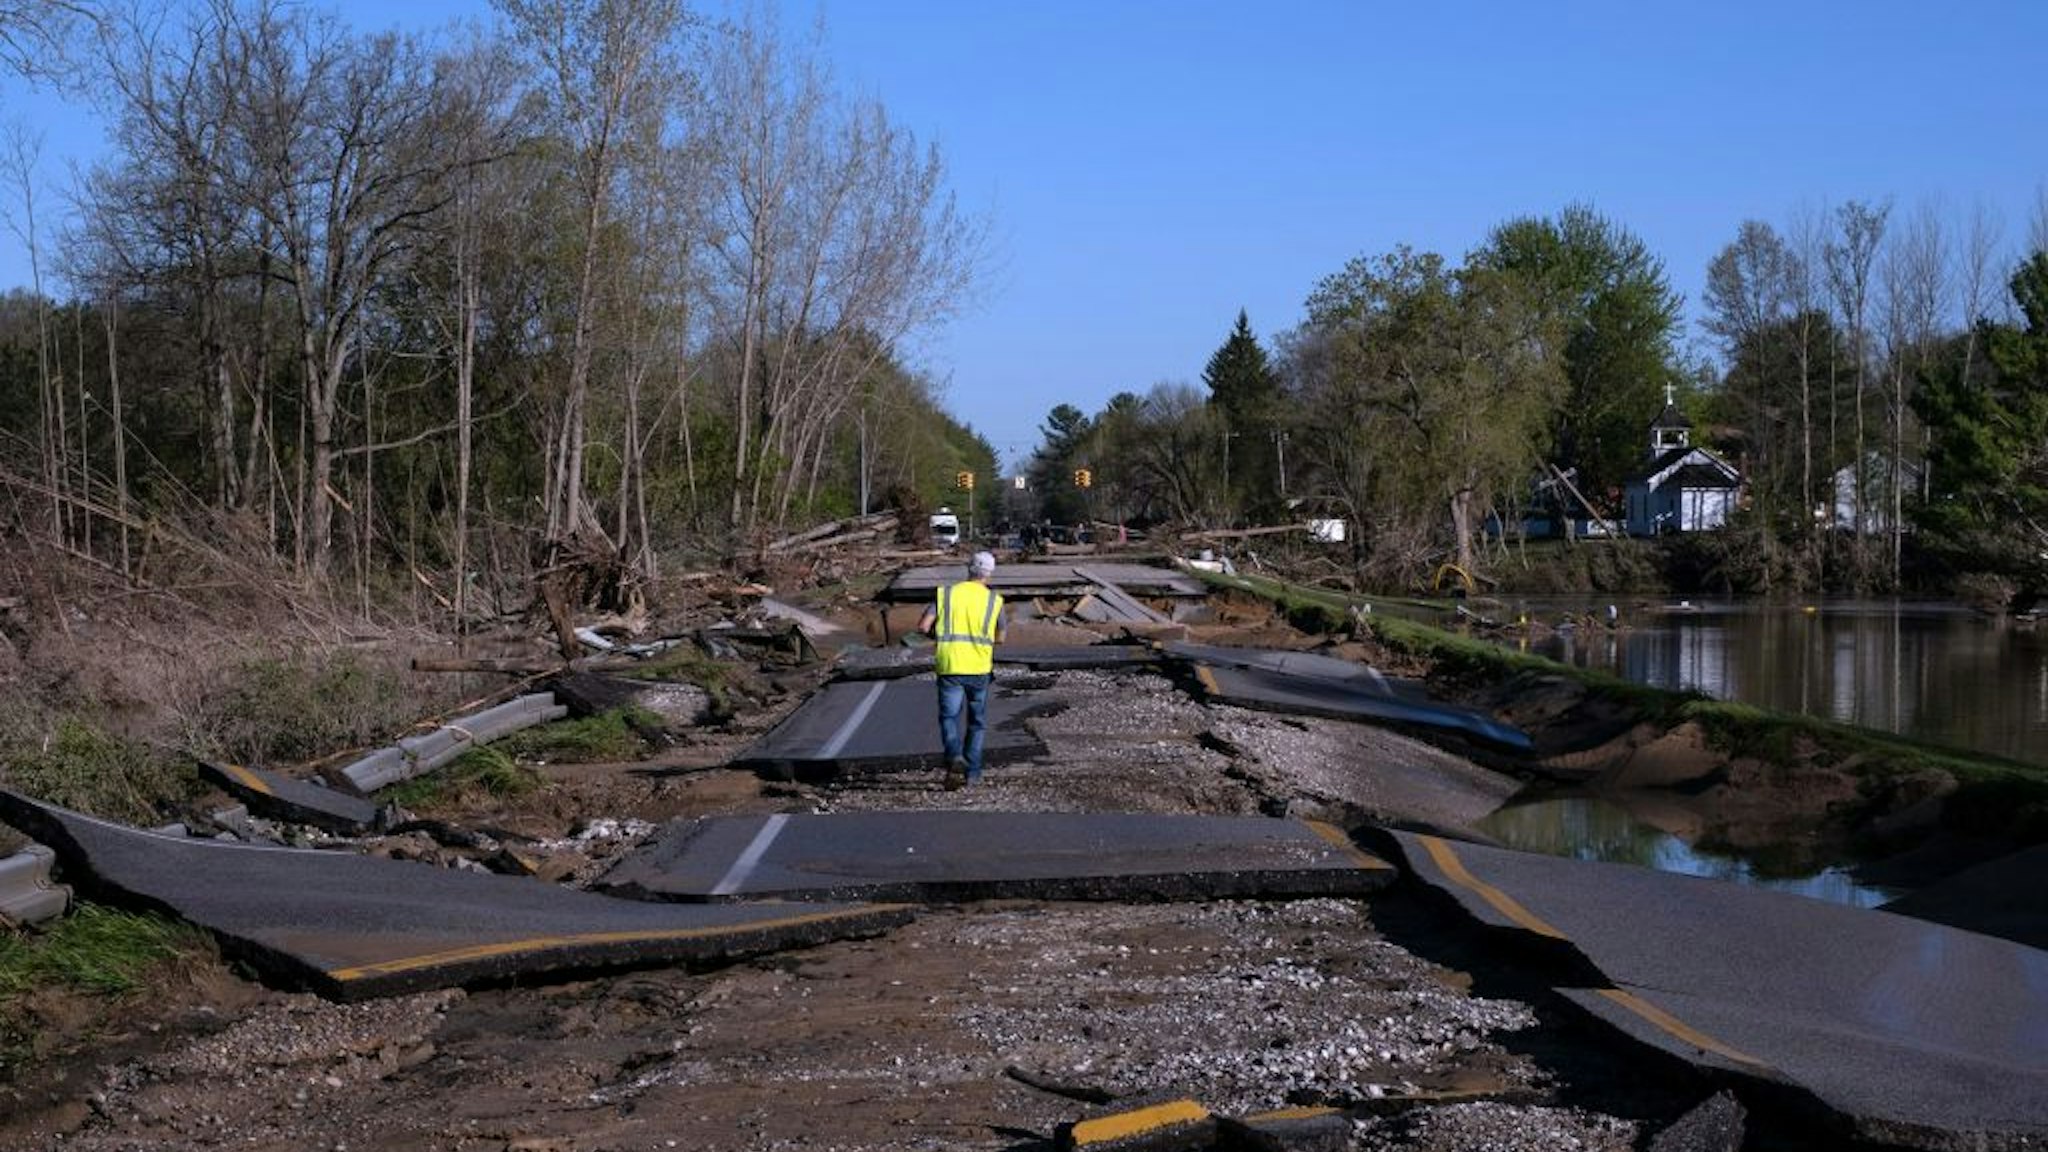 TOPSHOT - A man walks across a washed out West Saginaw Road in Sanford, Michigan, on May 21,2020, after the area saw heavy flooding and damage from heavy rains throughout central Michigan . - More than 10,000 residents were evacuating their homes in Michigan on May 20, 2020 after two dams failed following heavy rains triggered what officials warned will be historic flooding. Governor Gretchen Whitmer declared a state of emergency in Midland County, site of the breached dams, in the towns of Edenville and Sanford. (Photo by SETH HERALD / AFP) (Photo by SETH HERALD/AFP via Getty Images)